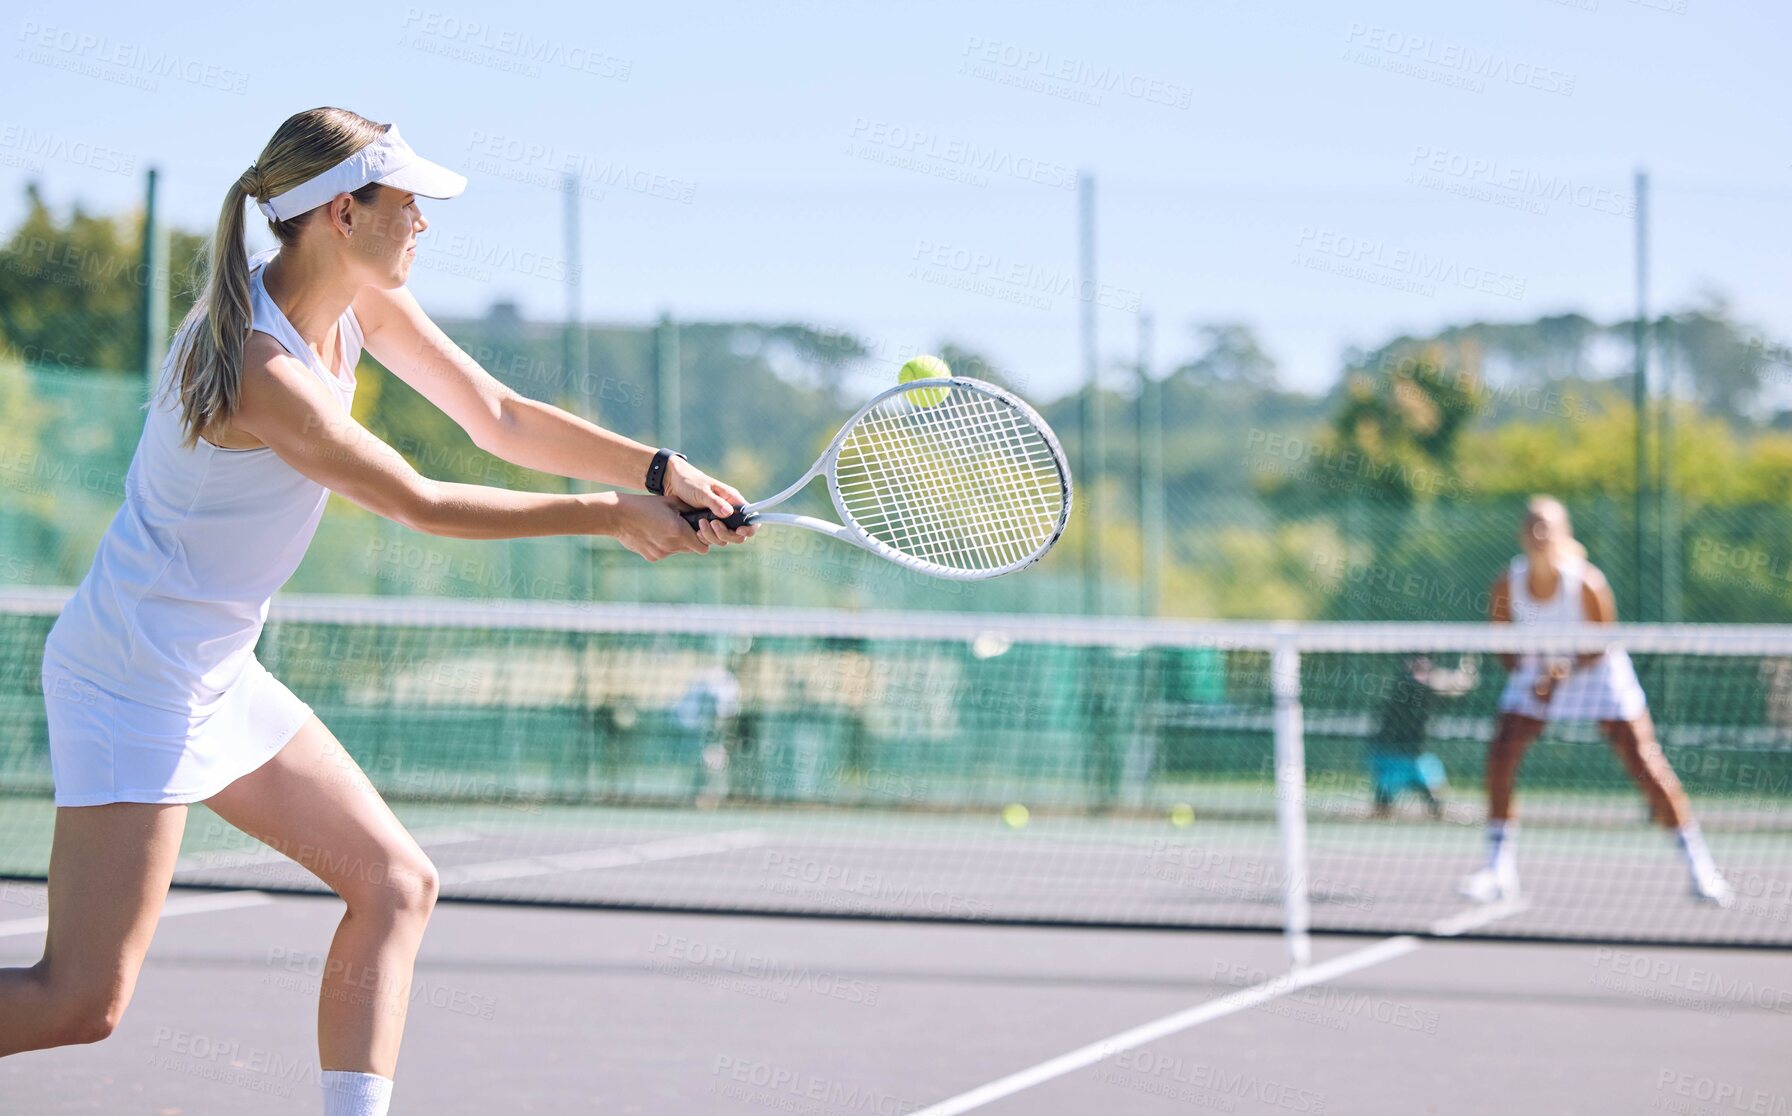 Buy stock photo Sports and active tennis player hitting ball with racket equipment during a competitive match or hobby activity on a court. Athletic, sporty and fit woman playing in a tournament game with sportswear